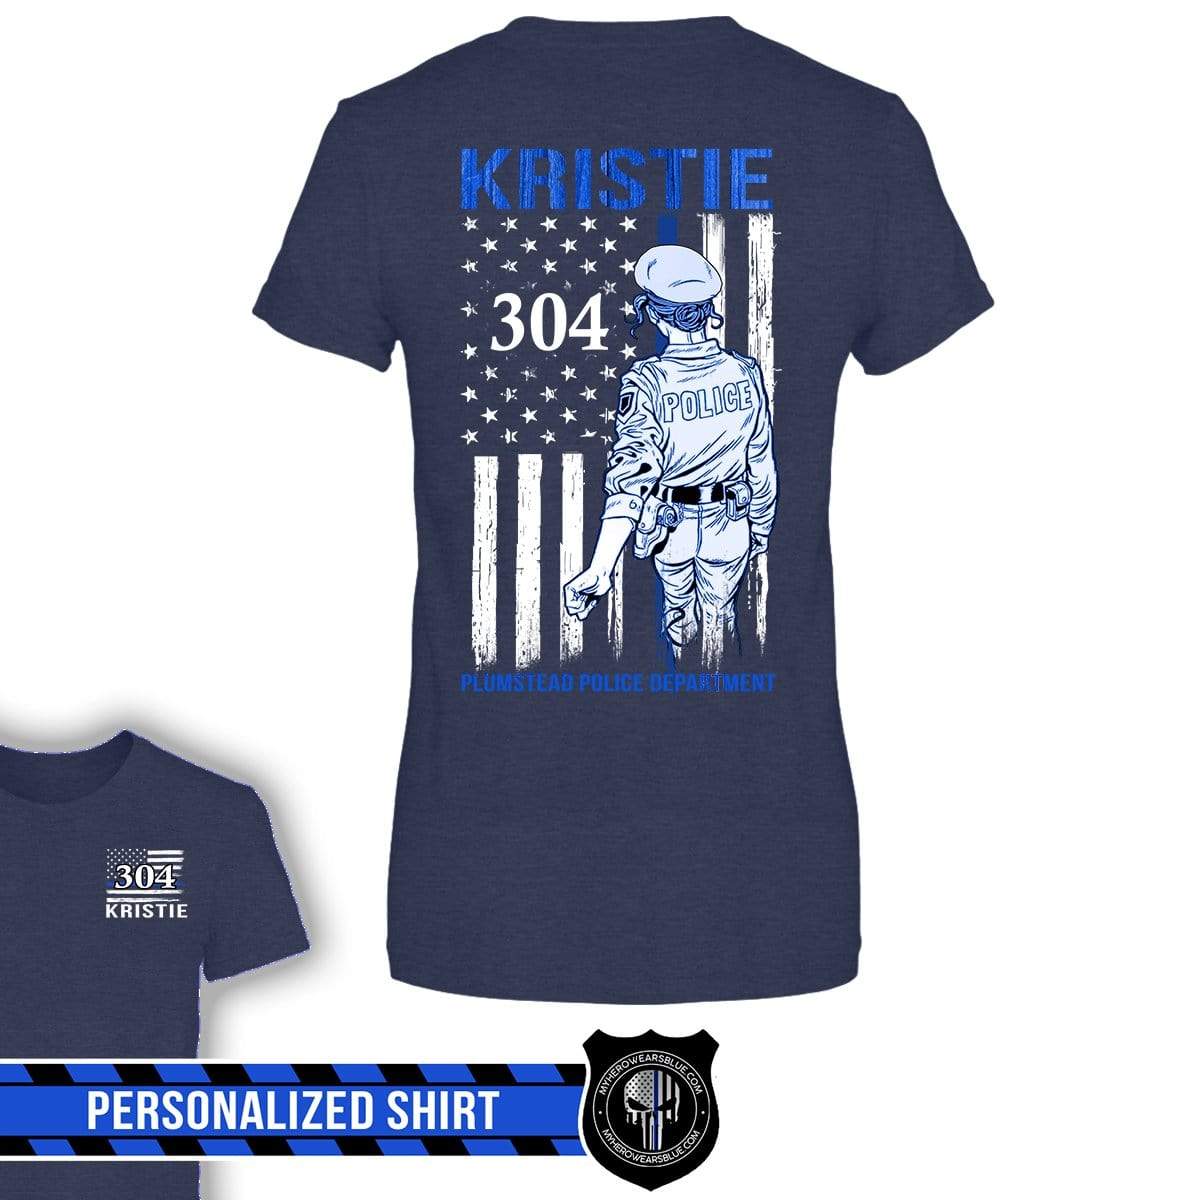  Cool I Like Big Busts, Police Officer or Cop Graphic Tshirt &  Stuff - Baby Blue T-Shirt, Small : Clothing, Shoes & Jewelry